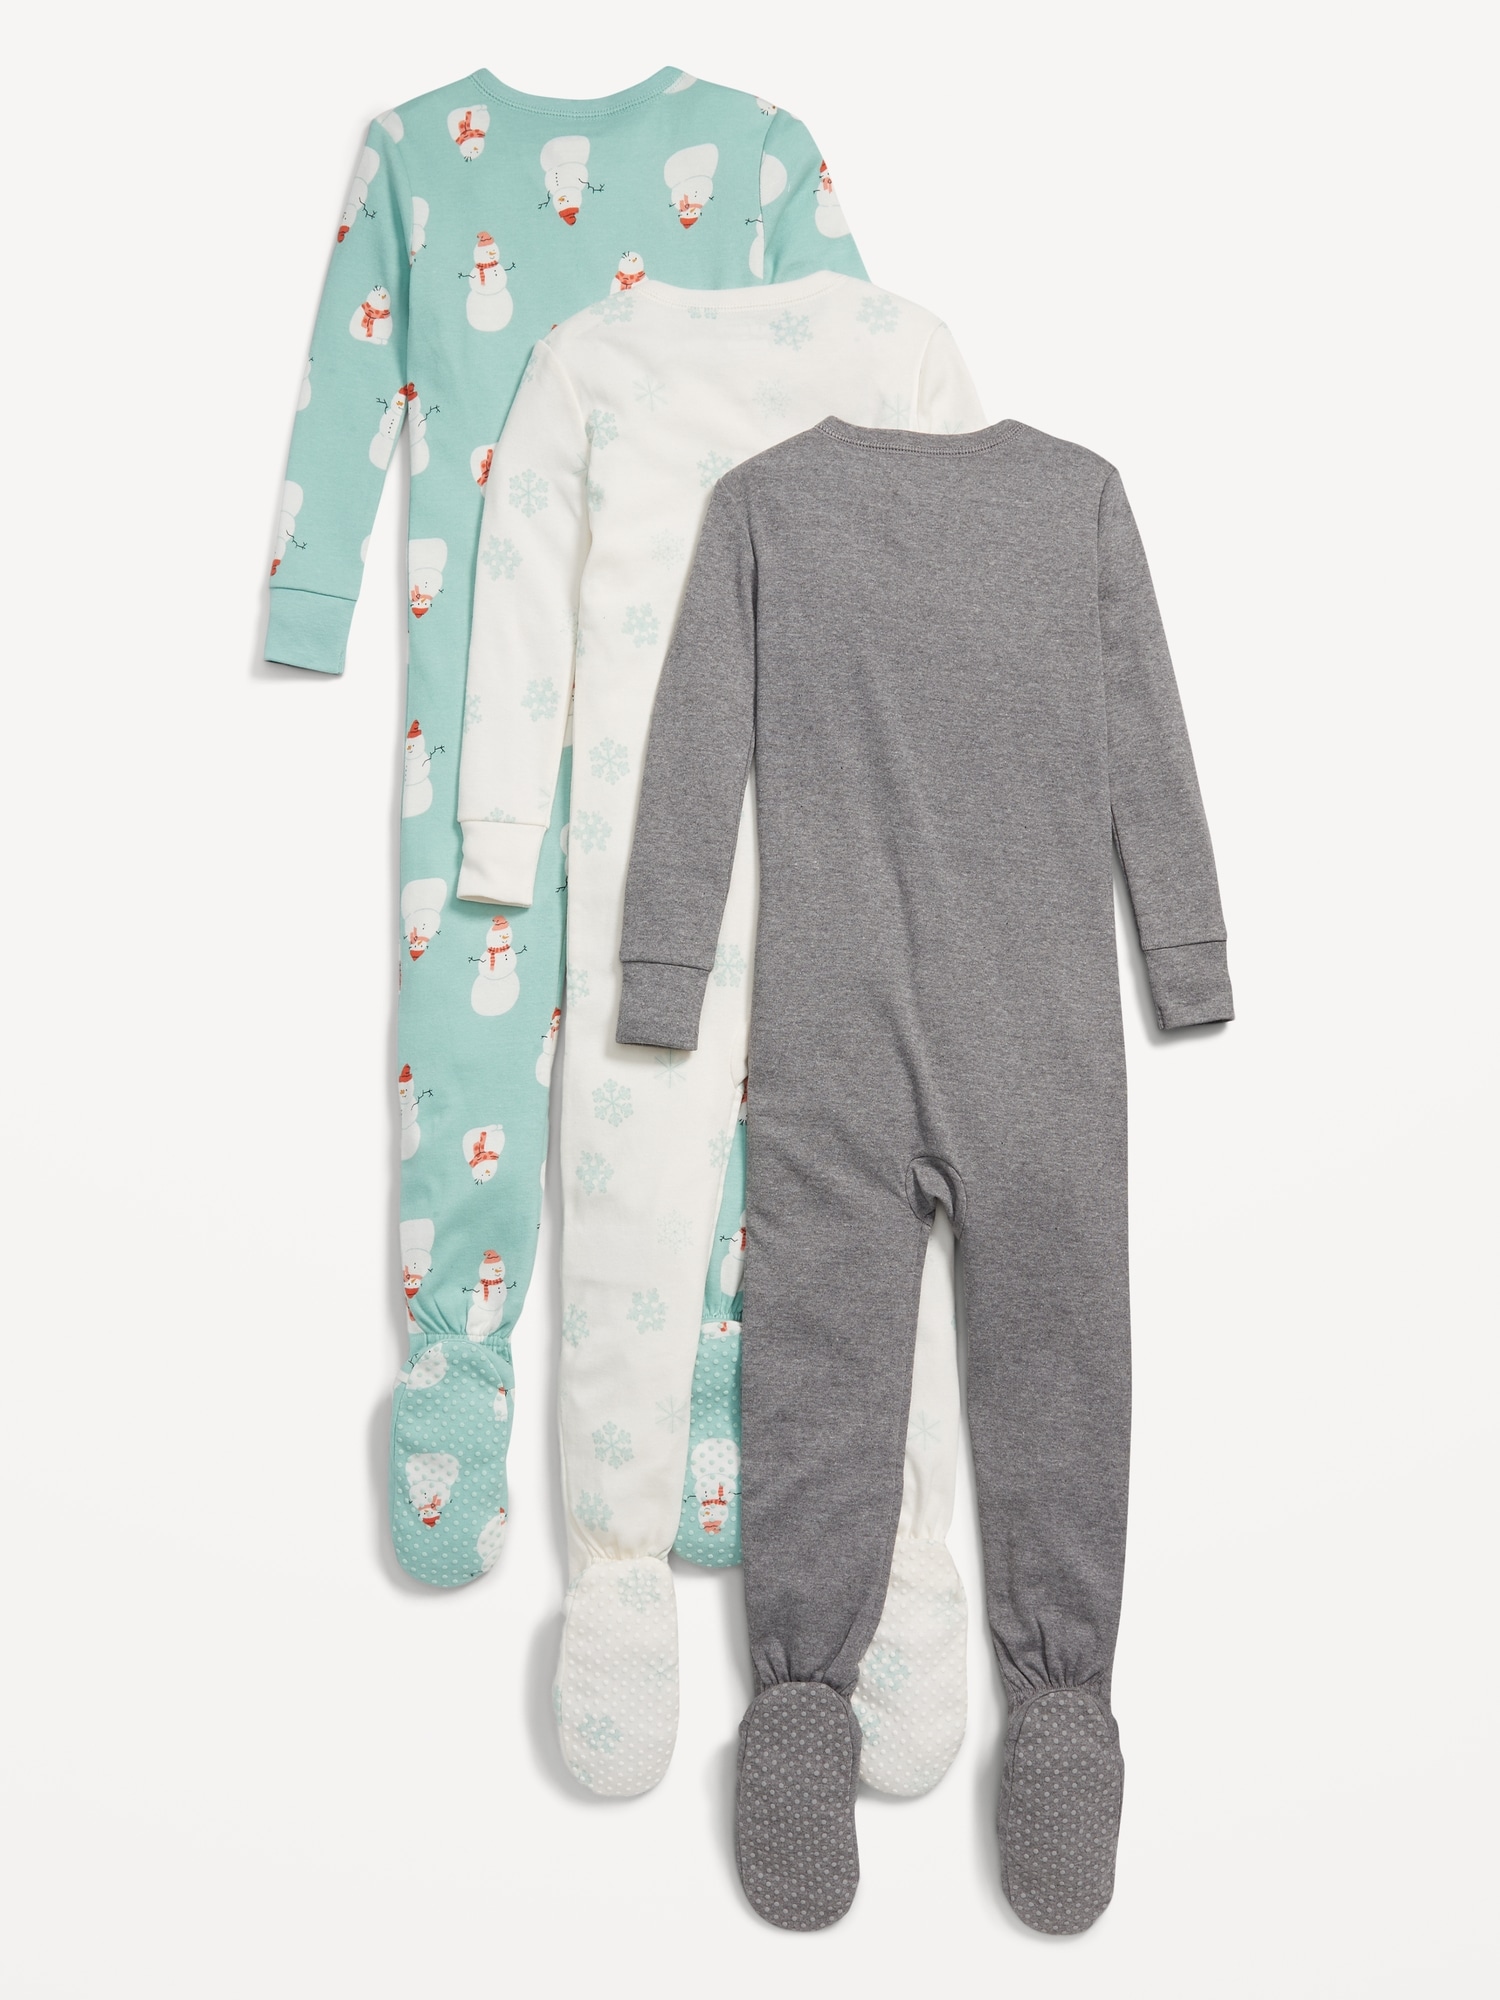 Unisex 2-Way-Zip Snug-Fit Pajama One-Piece 3-Pack for Toddler & Baby